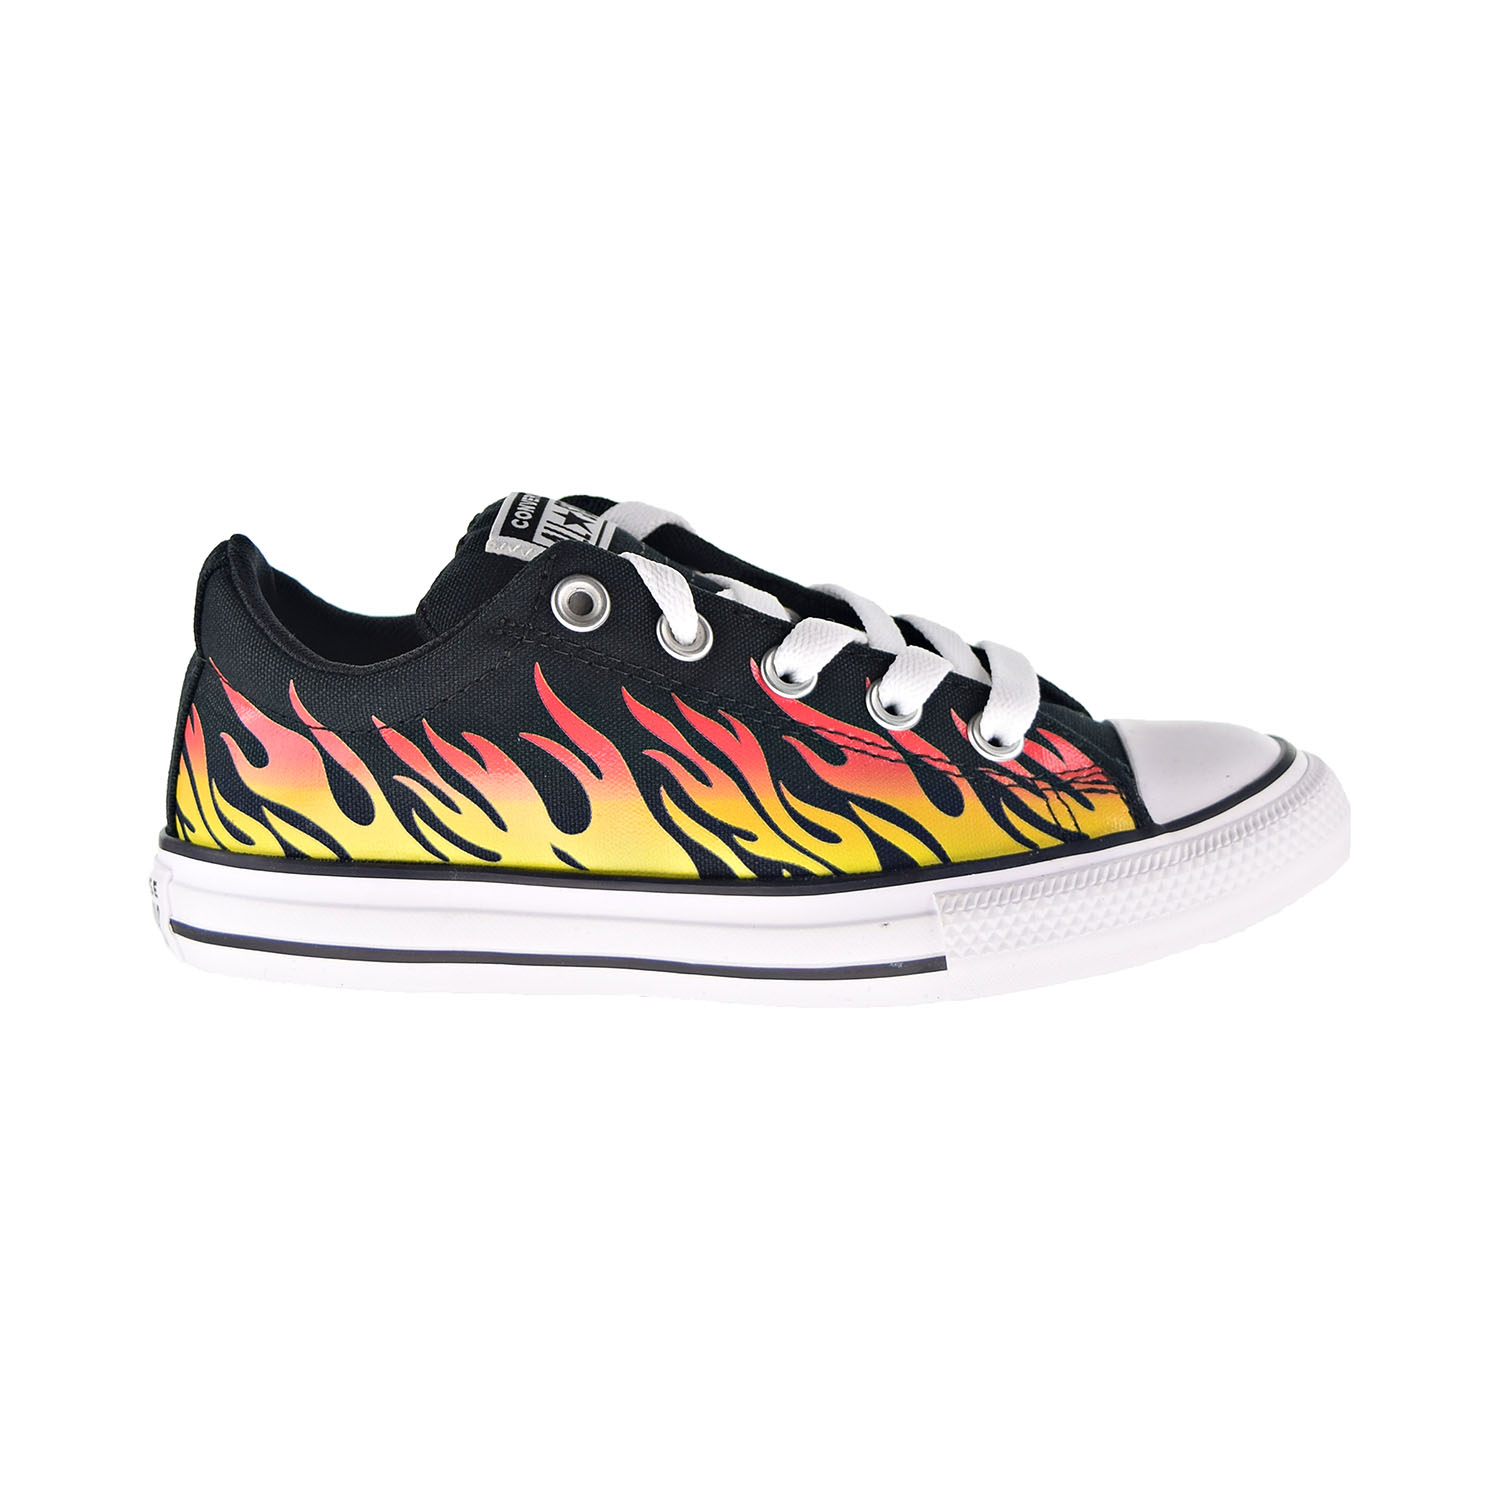 Children's Converse Chuck Taylor All Star Street Flames Slip On - image 1 of 6